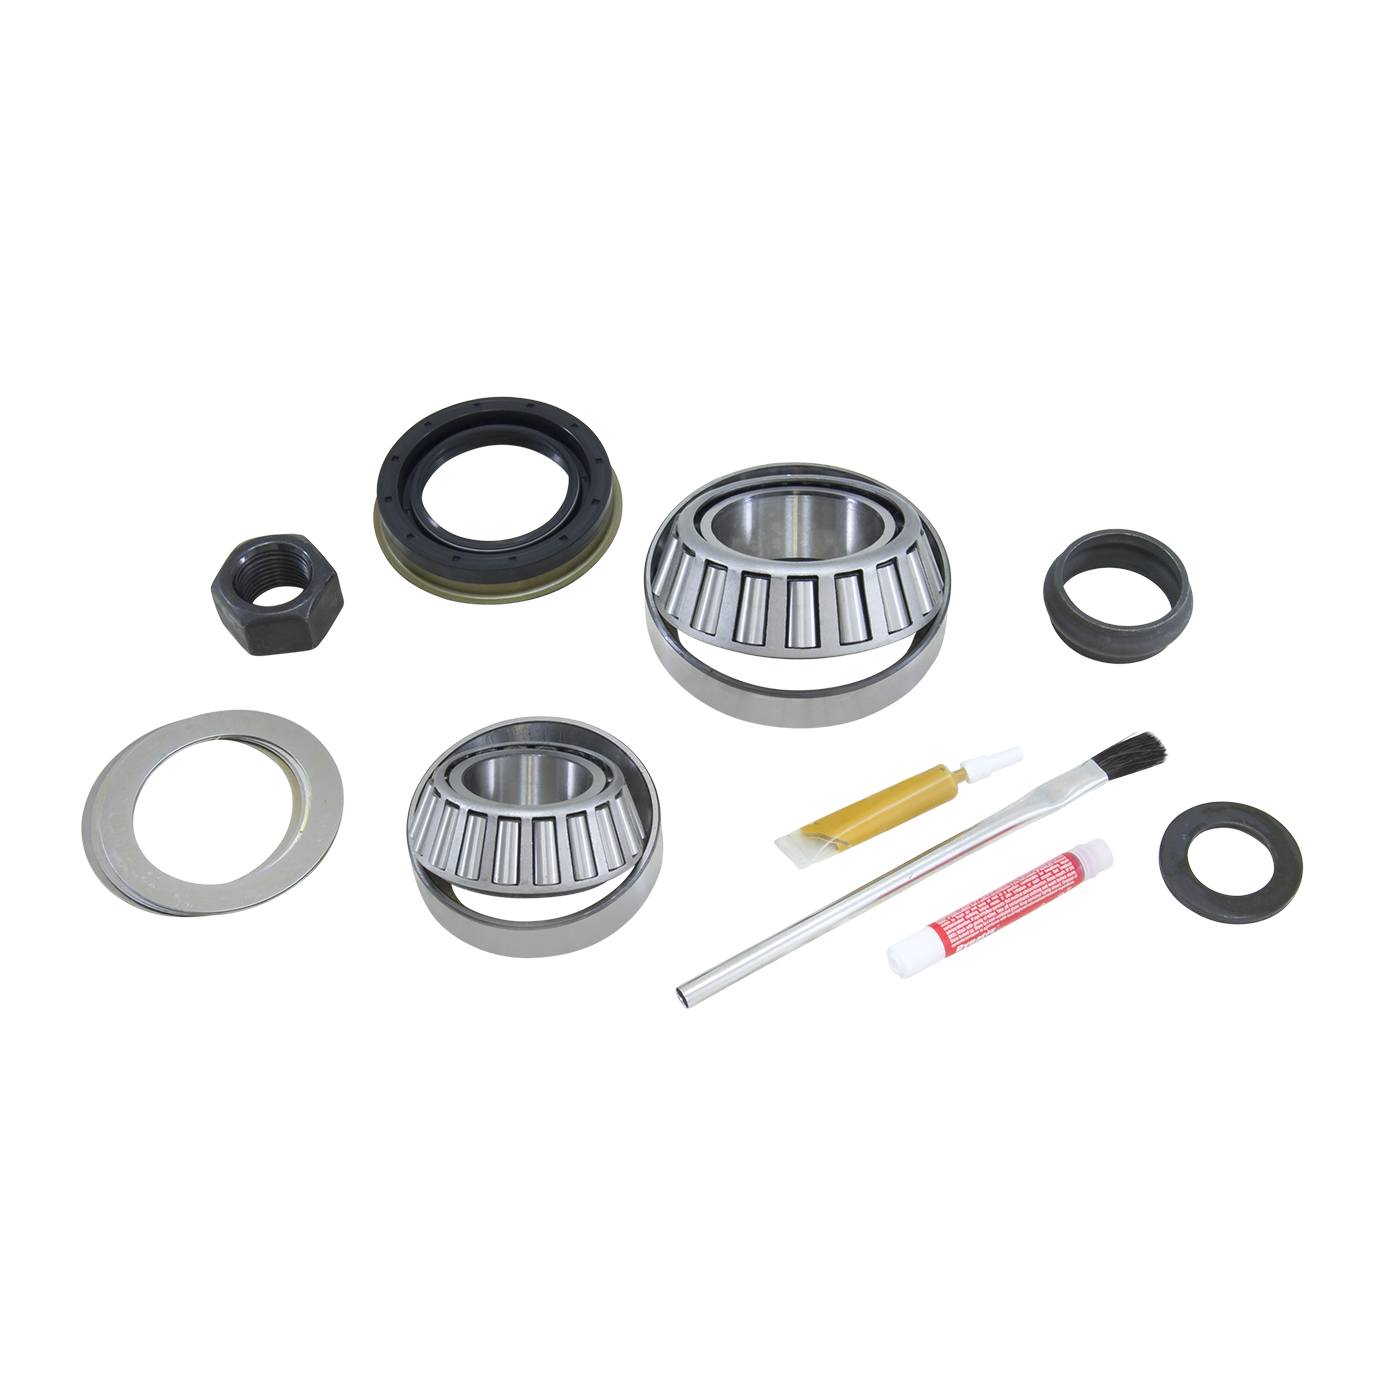 Yukon Pinion install kit for '92 and older Dana 44 IFS differential 